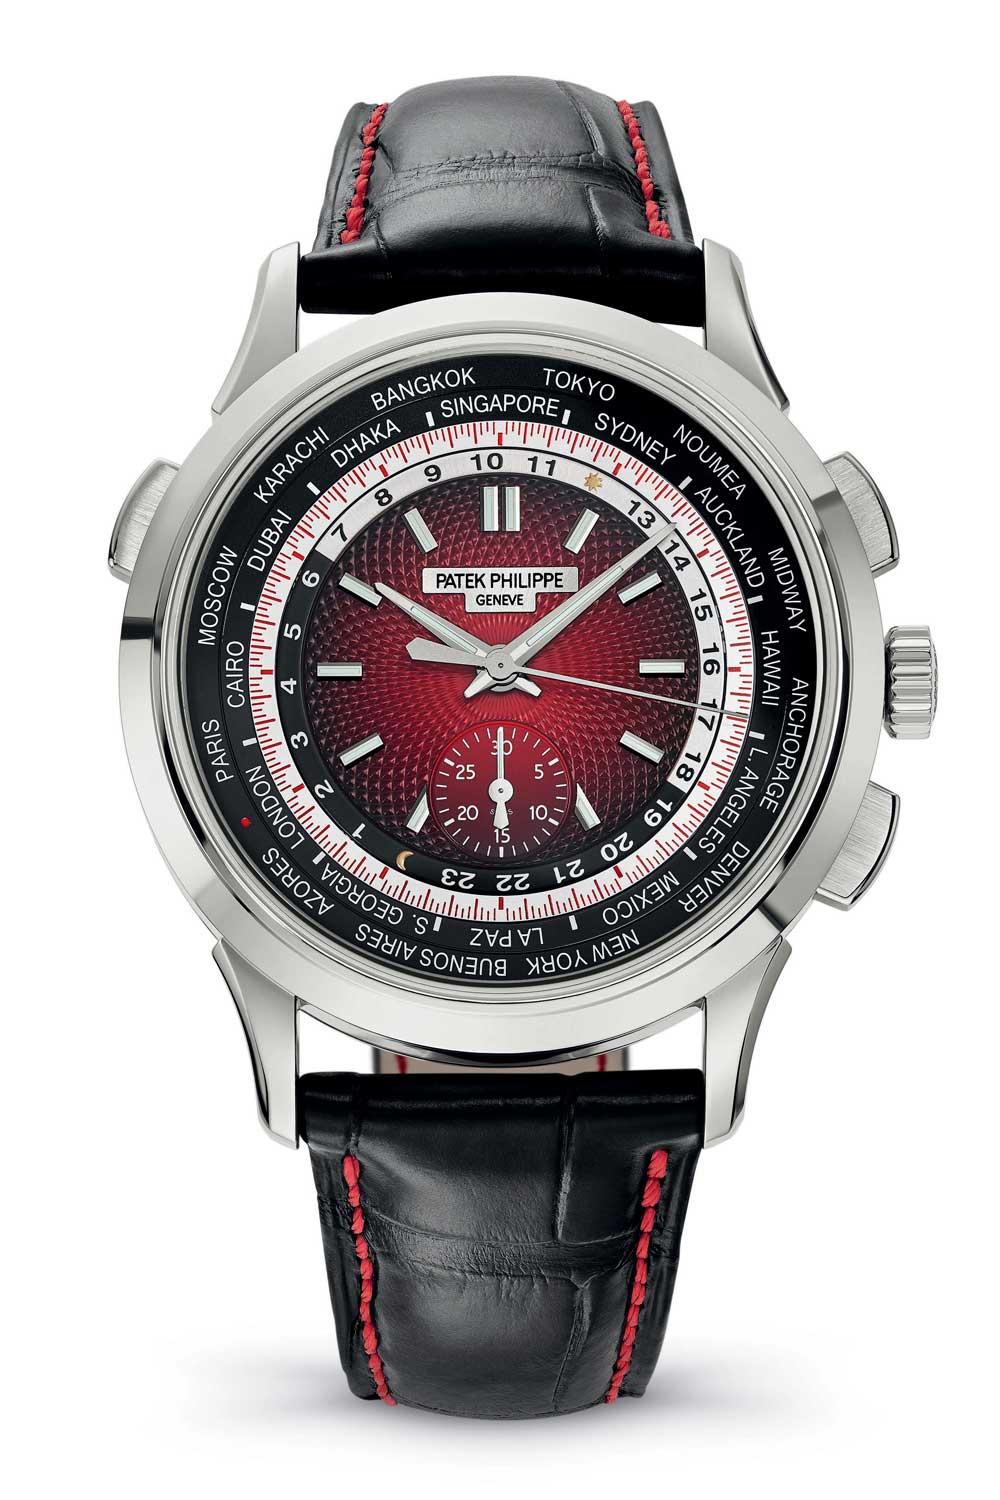 Ref. 5930 – World Time Chronograph Singapore 2019 Special Edition. Limited to 300 pieces.